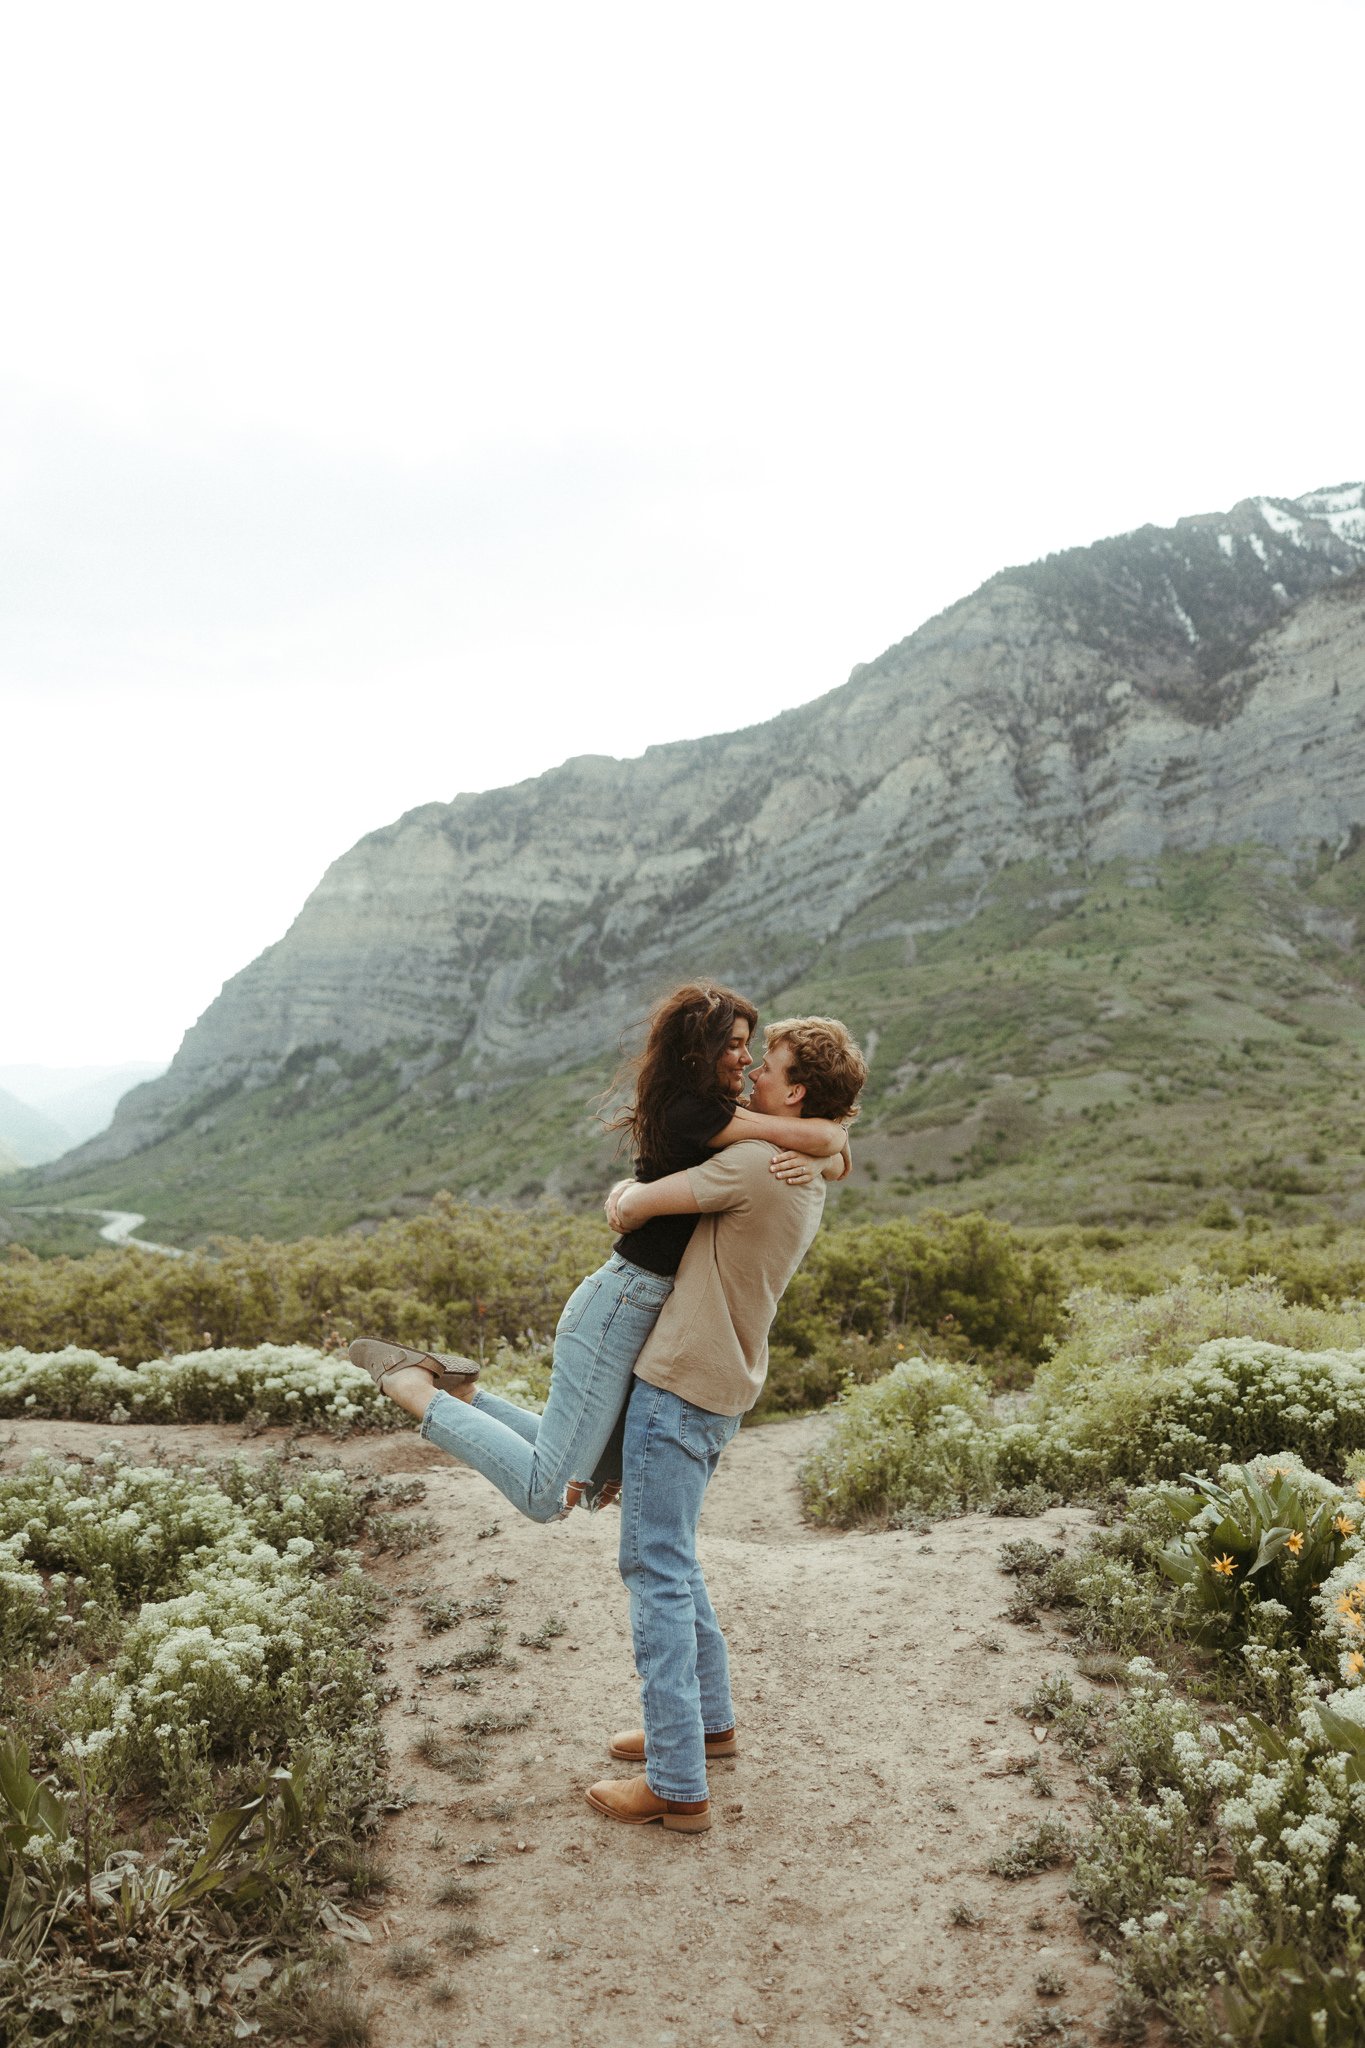 Spring-Provo-Canyon-Wildflowers-Engagement-Session-69